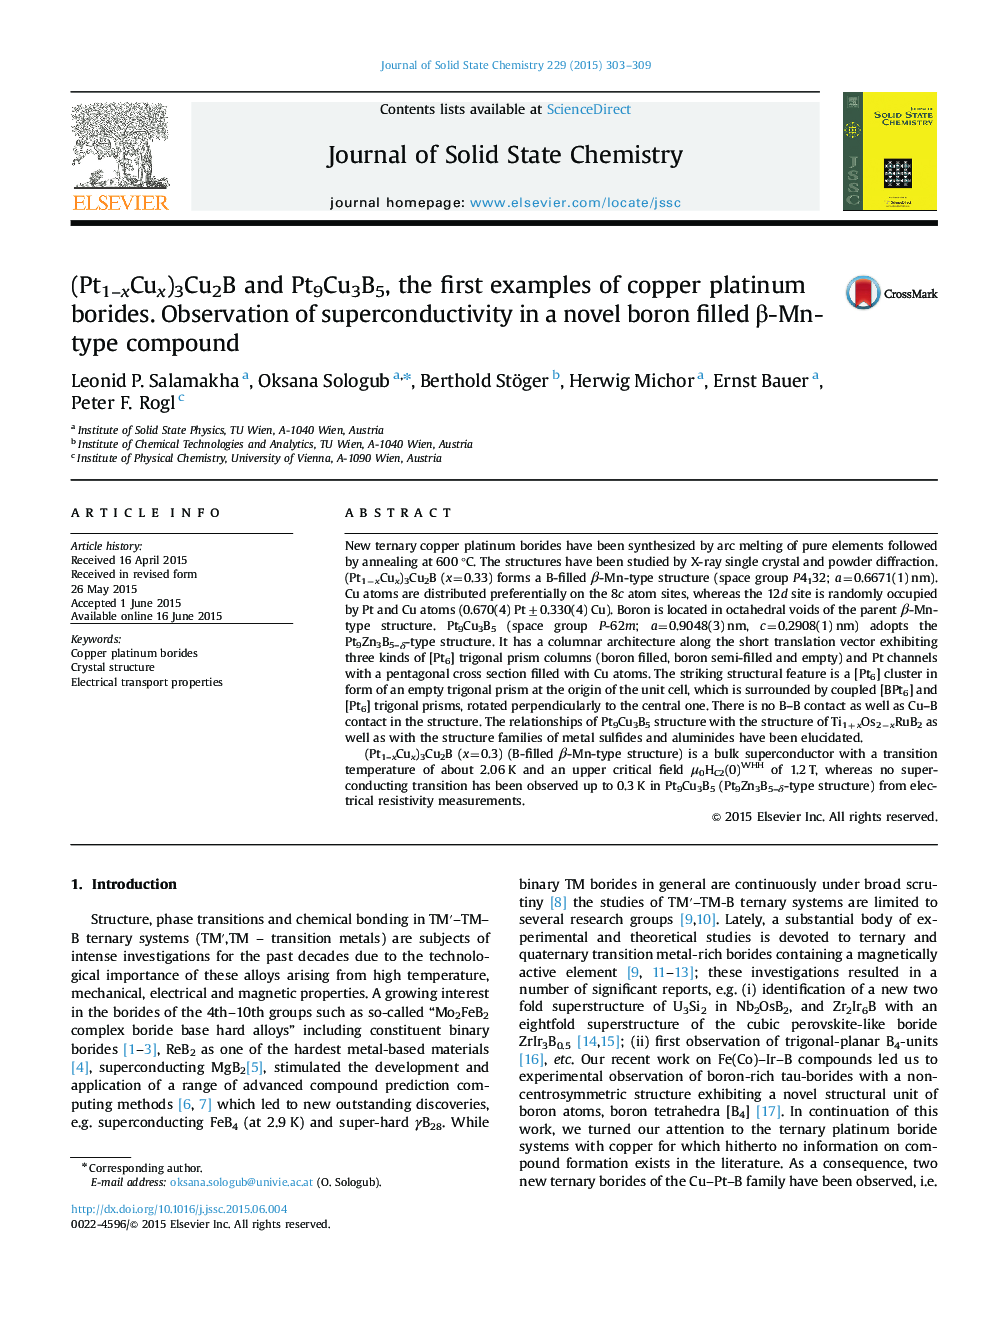 (Pt1-xCux)3Cu2B and Pt9Cu3B5, the first examples of copper platinum borides. Observation of superconductivity in a novel boron filled Î²-Mn-type compound